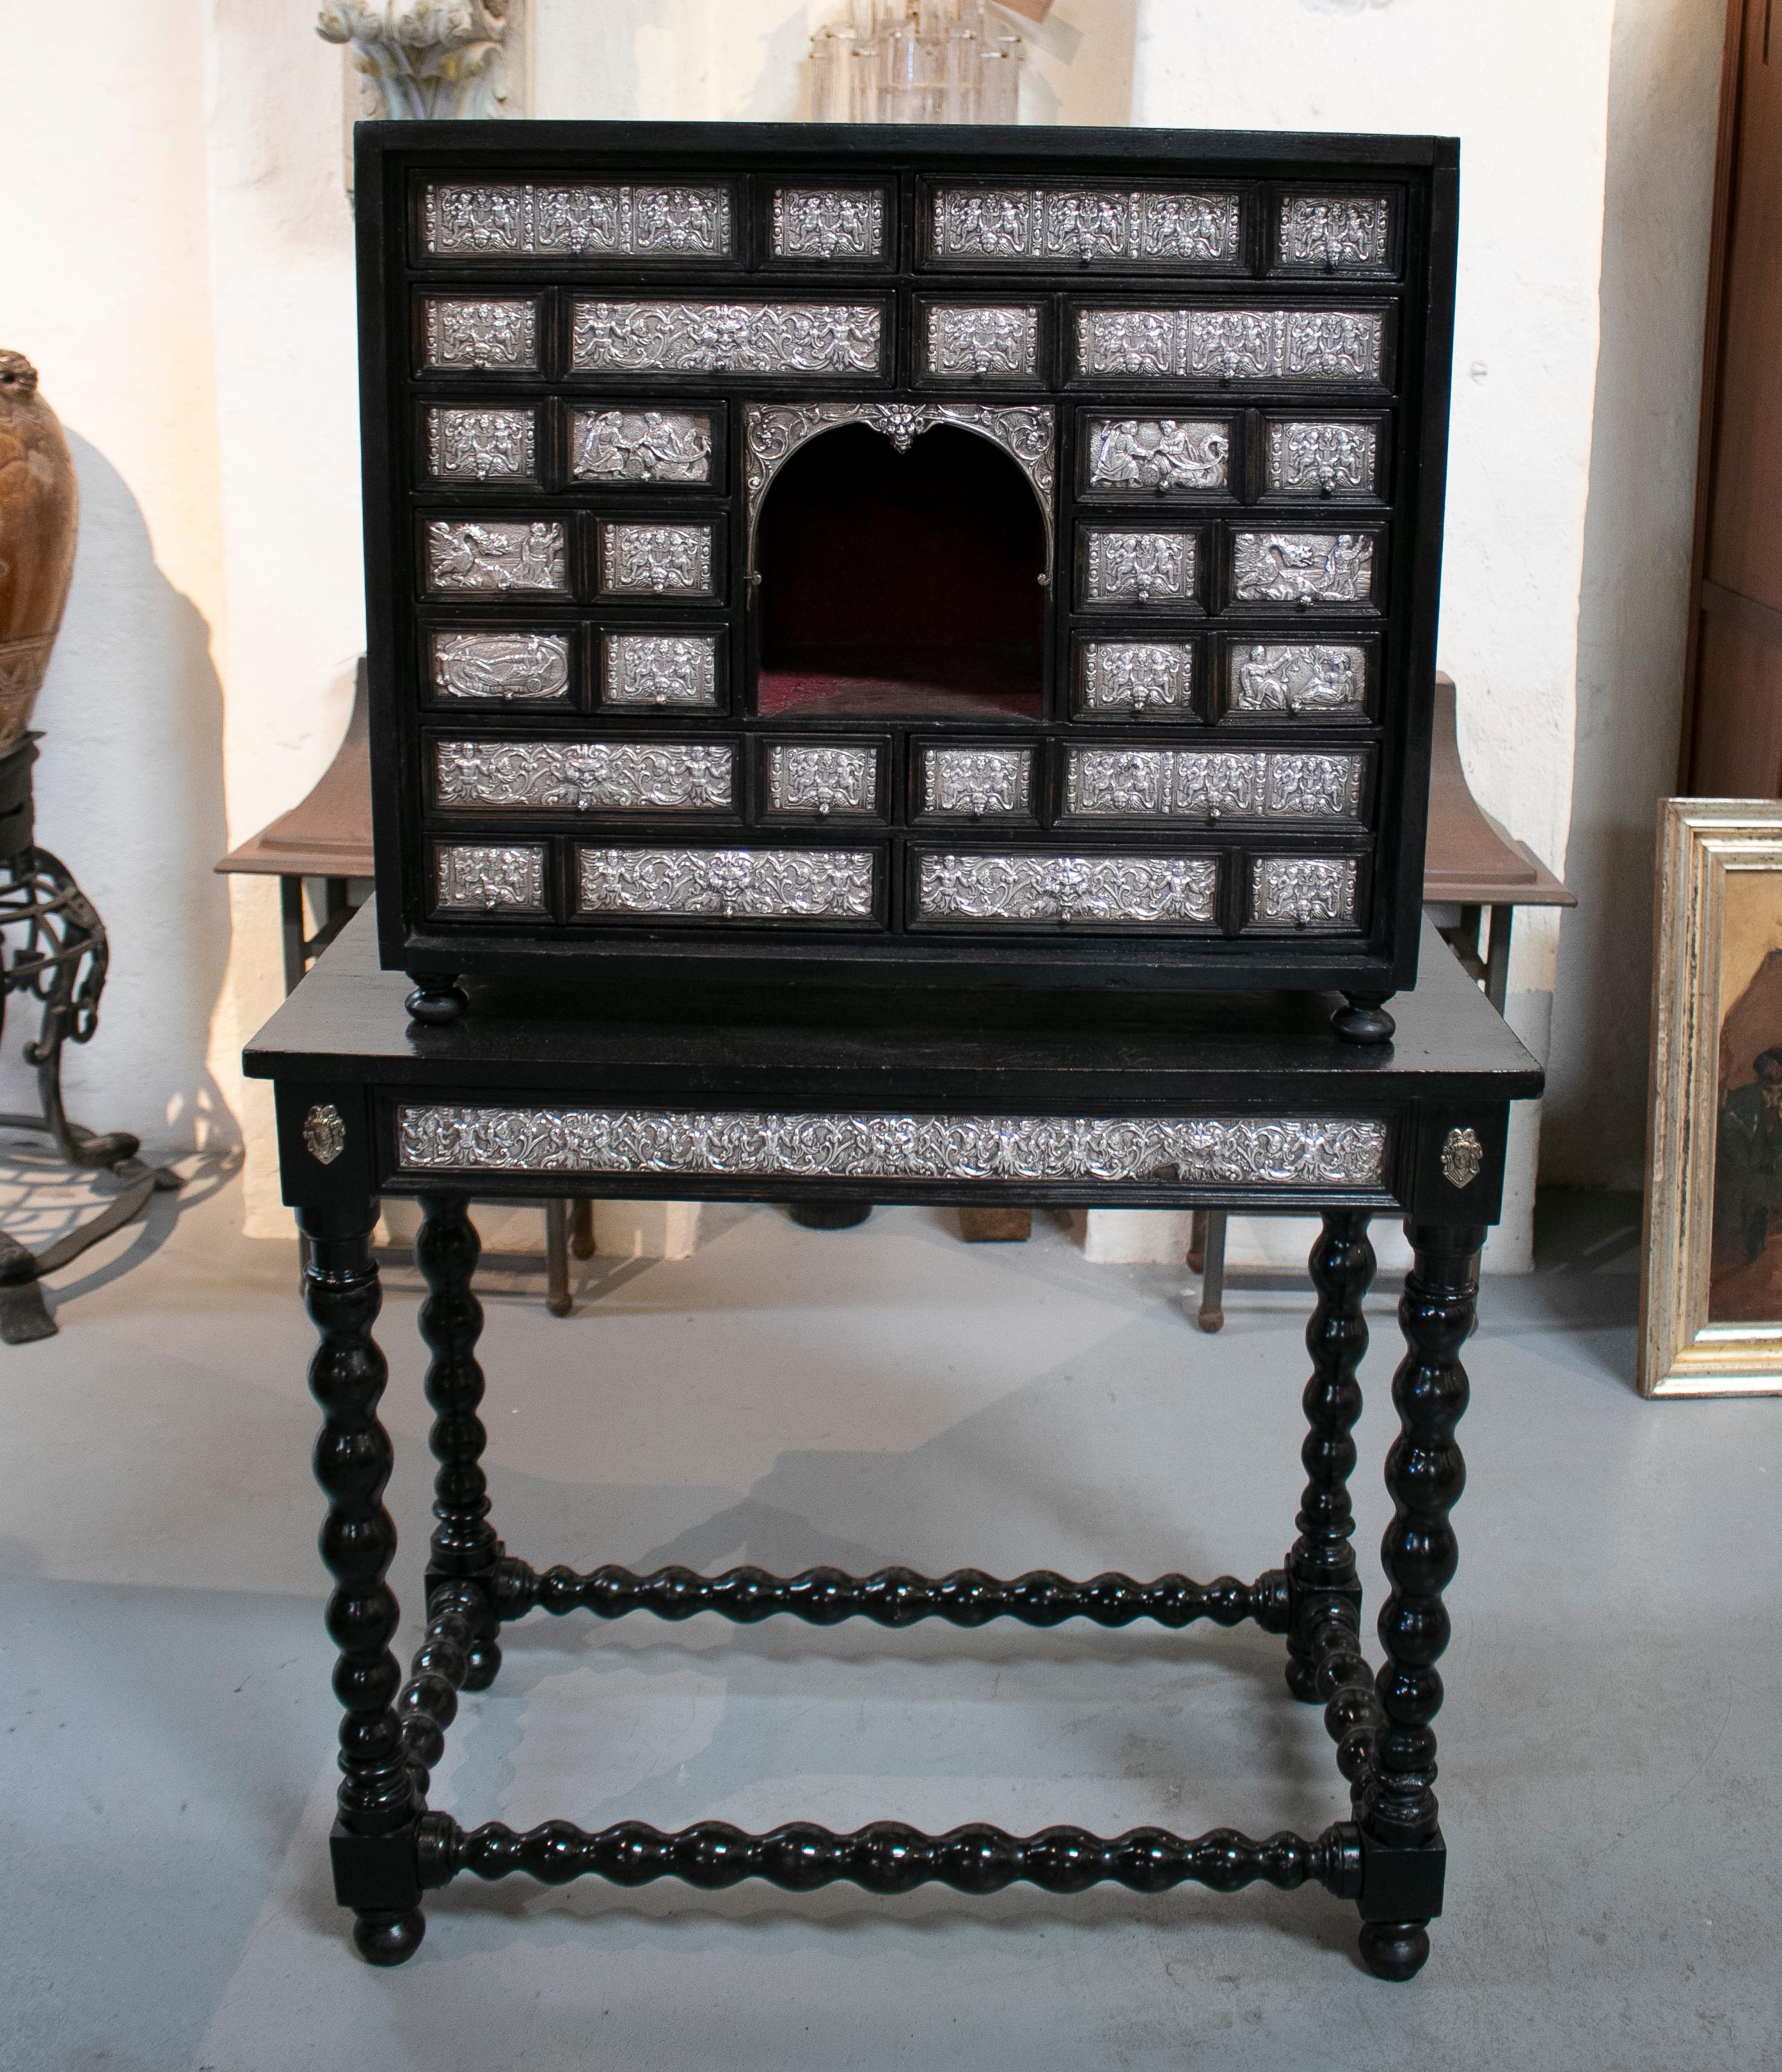 18th century Italian silver and ebonized wood barqueño desk and chest of drawers.